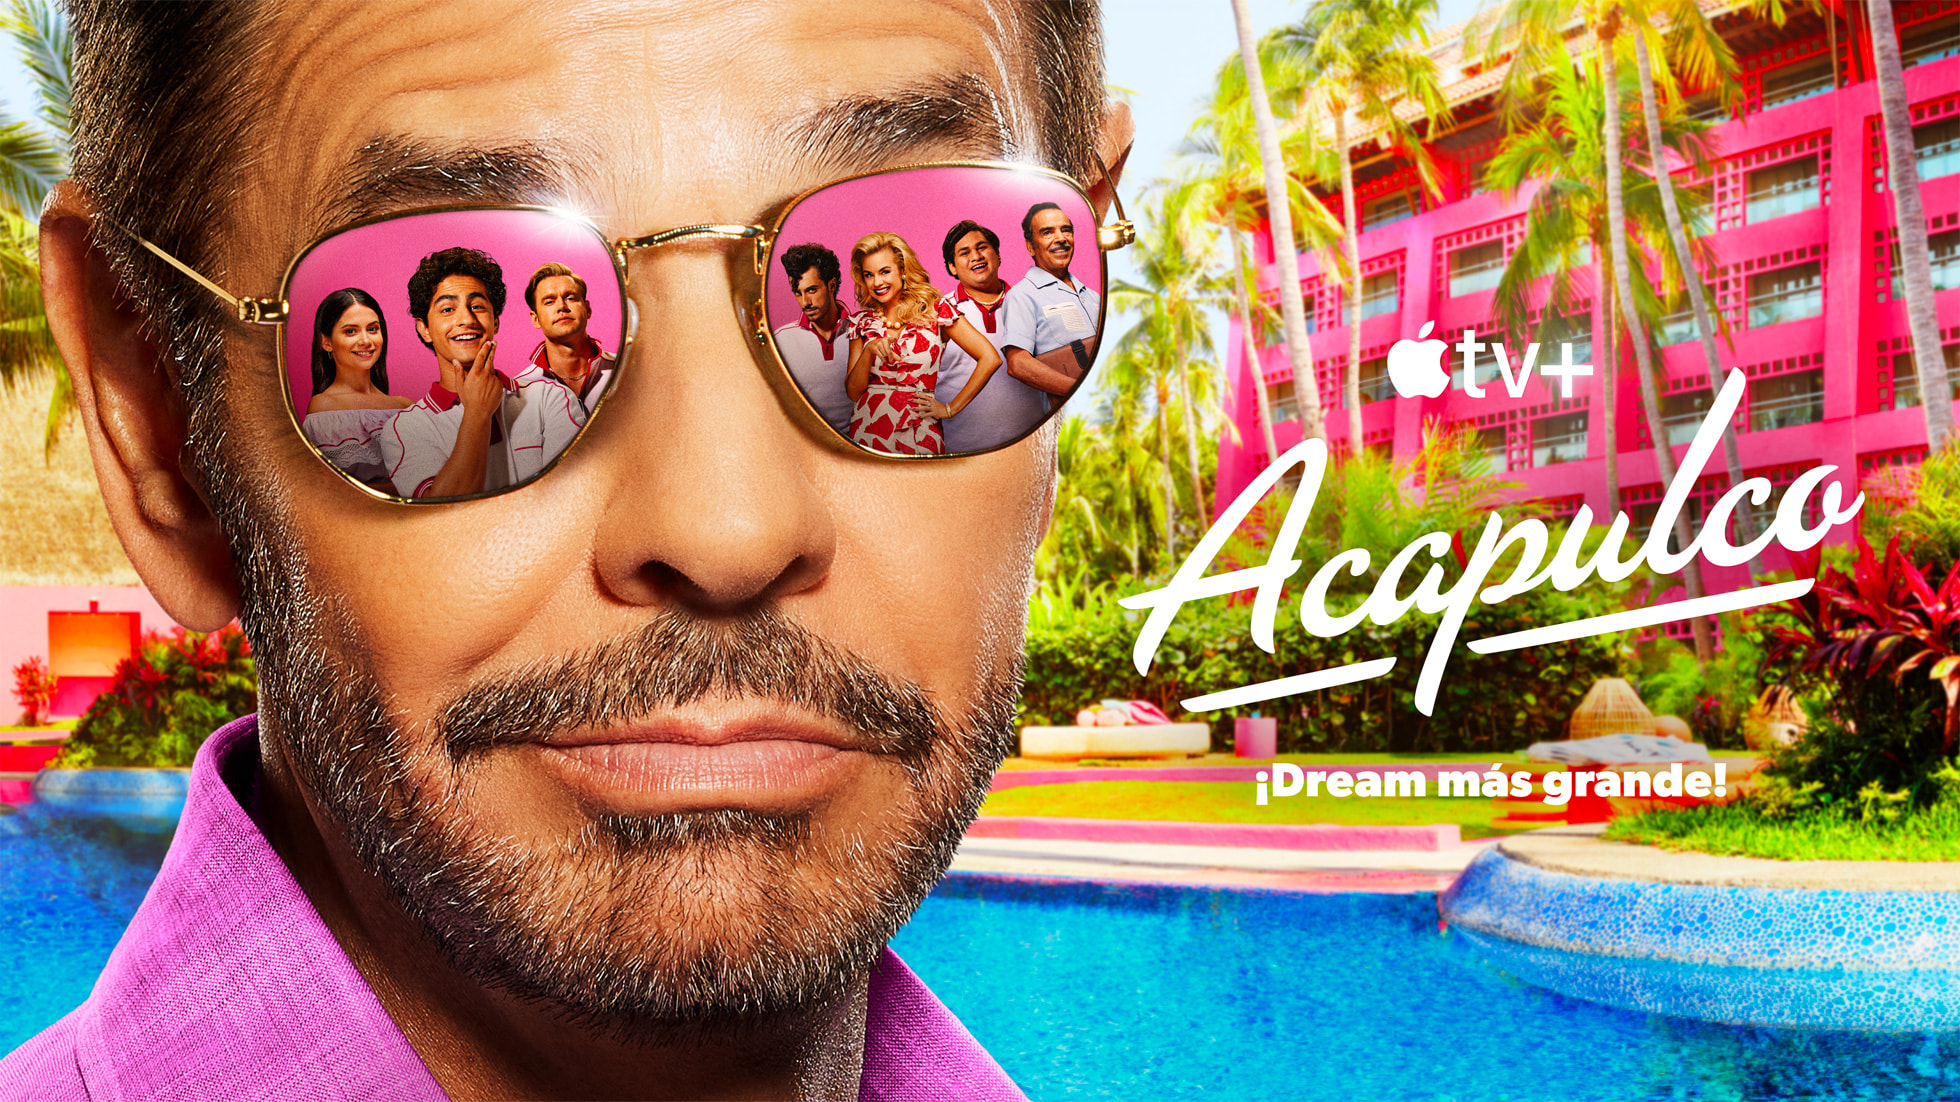 Apple Tv Unveils Trailer For Season Two Of Global Hit Comedy Series “acapulco” Apple Tv Press